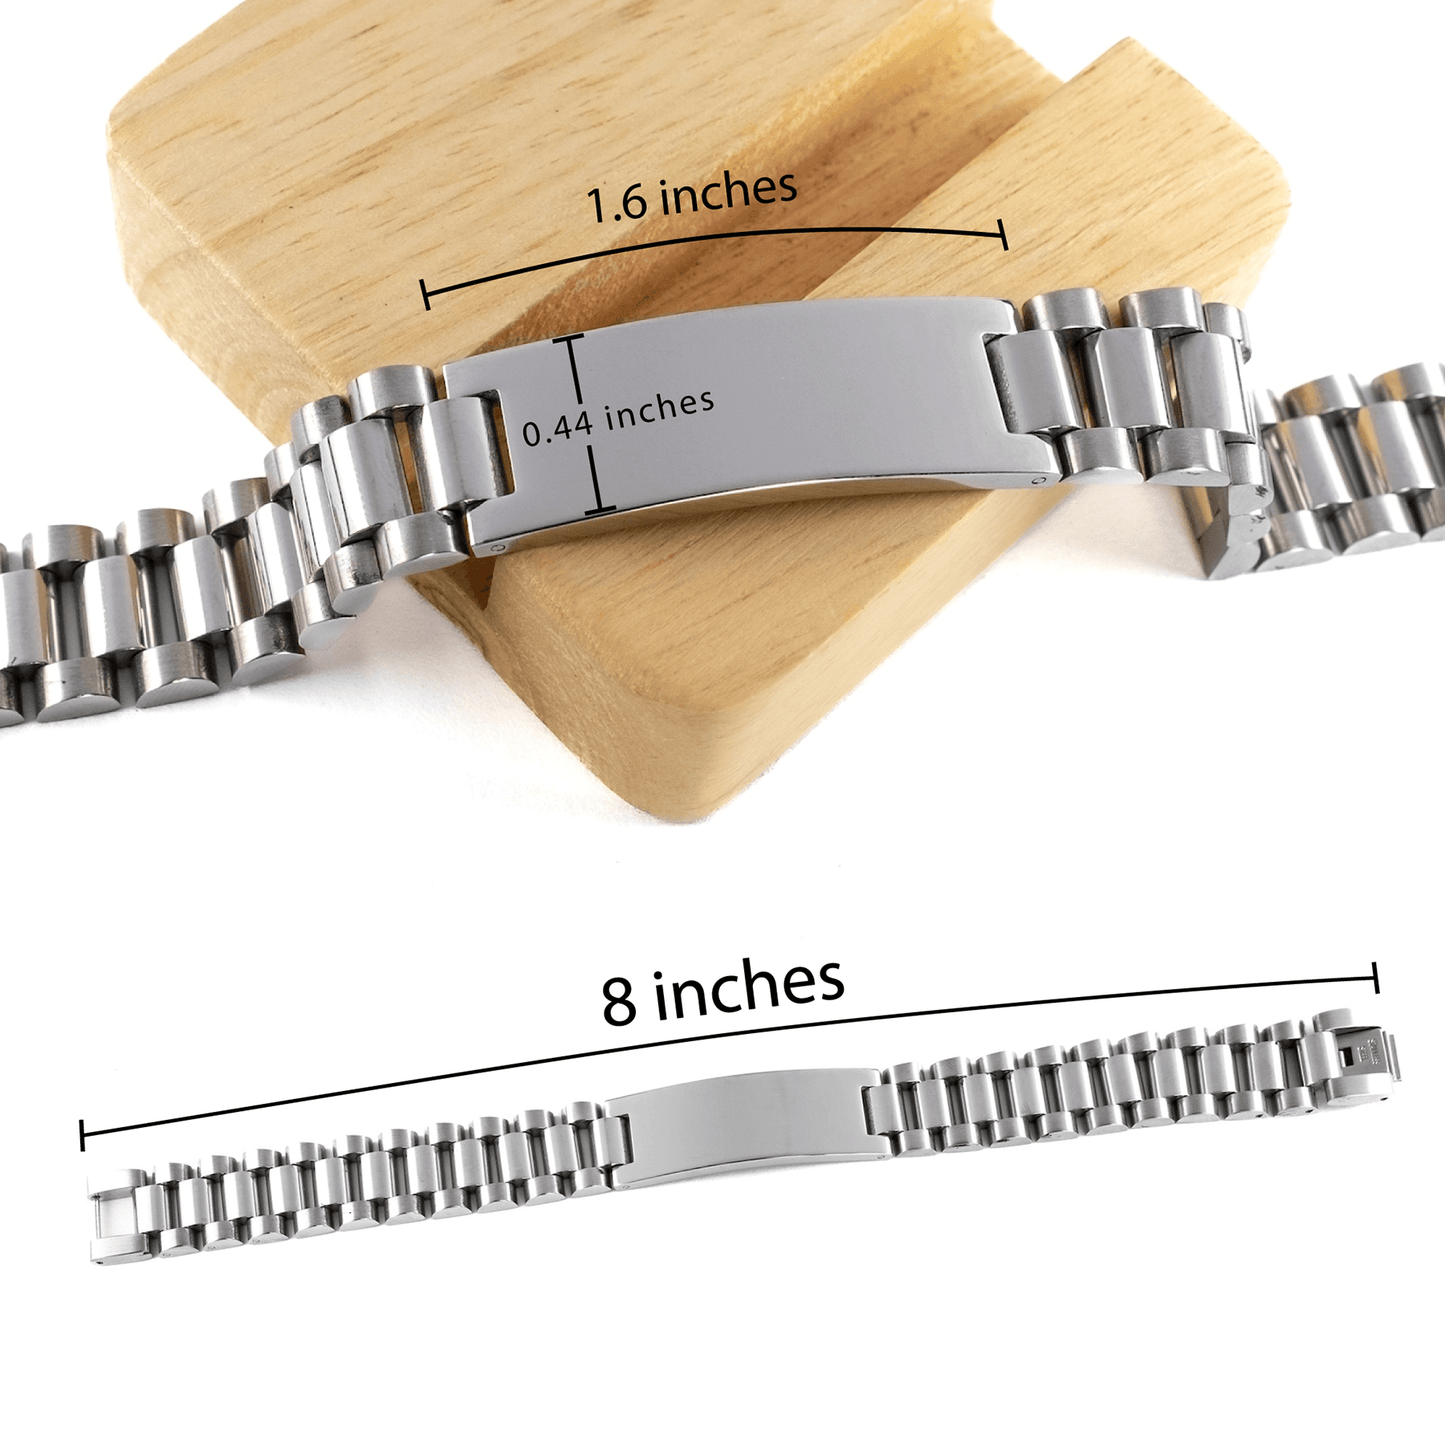 Magistrate Ladder Stainless Steel Engraved Bracelet - Thanks for being who you are - Birthday Christmas Jewelry Gifts Coworkers Colleague Boss - Mallard Moon Gift Shop